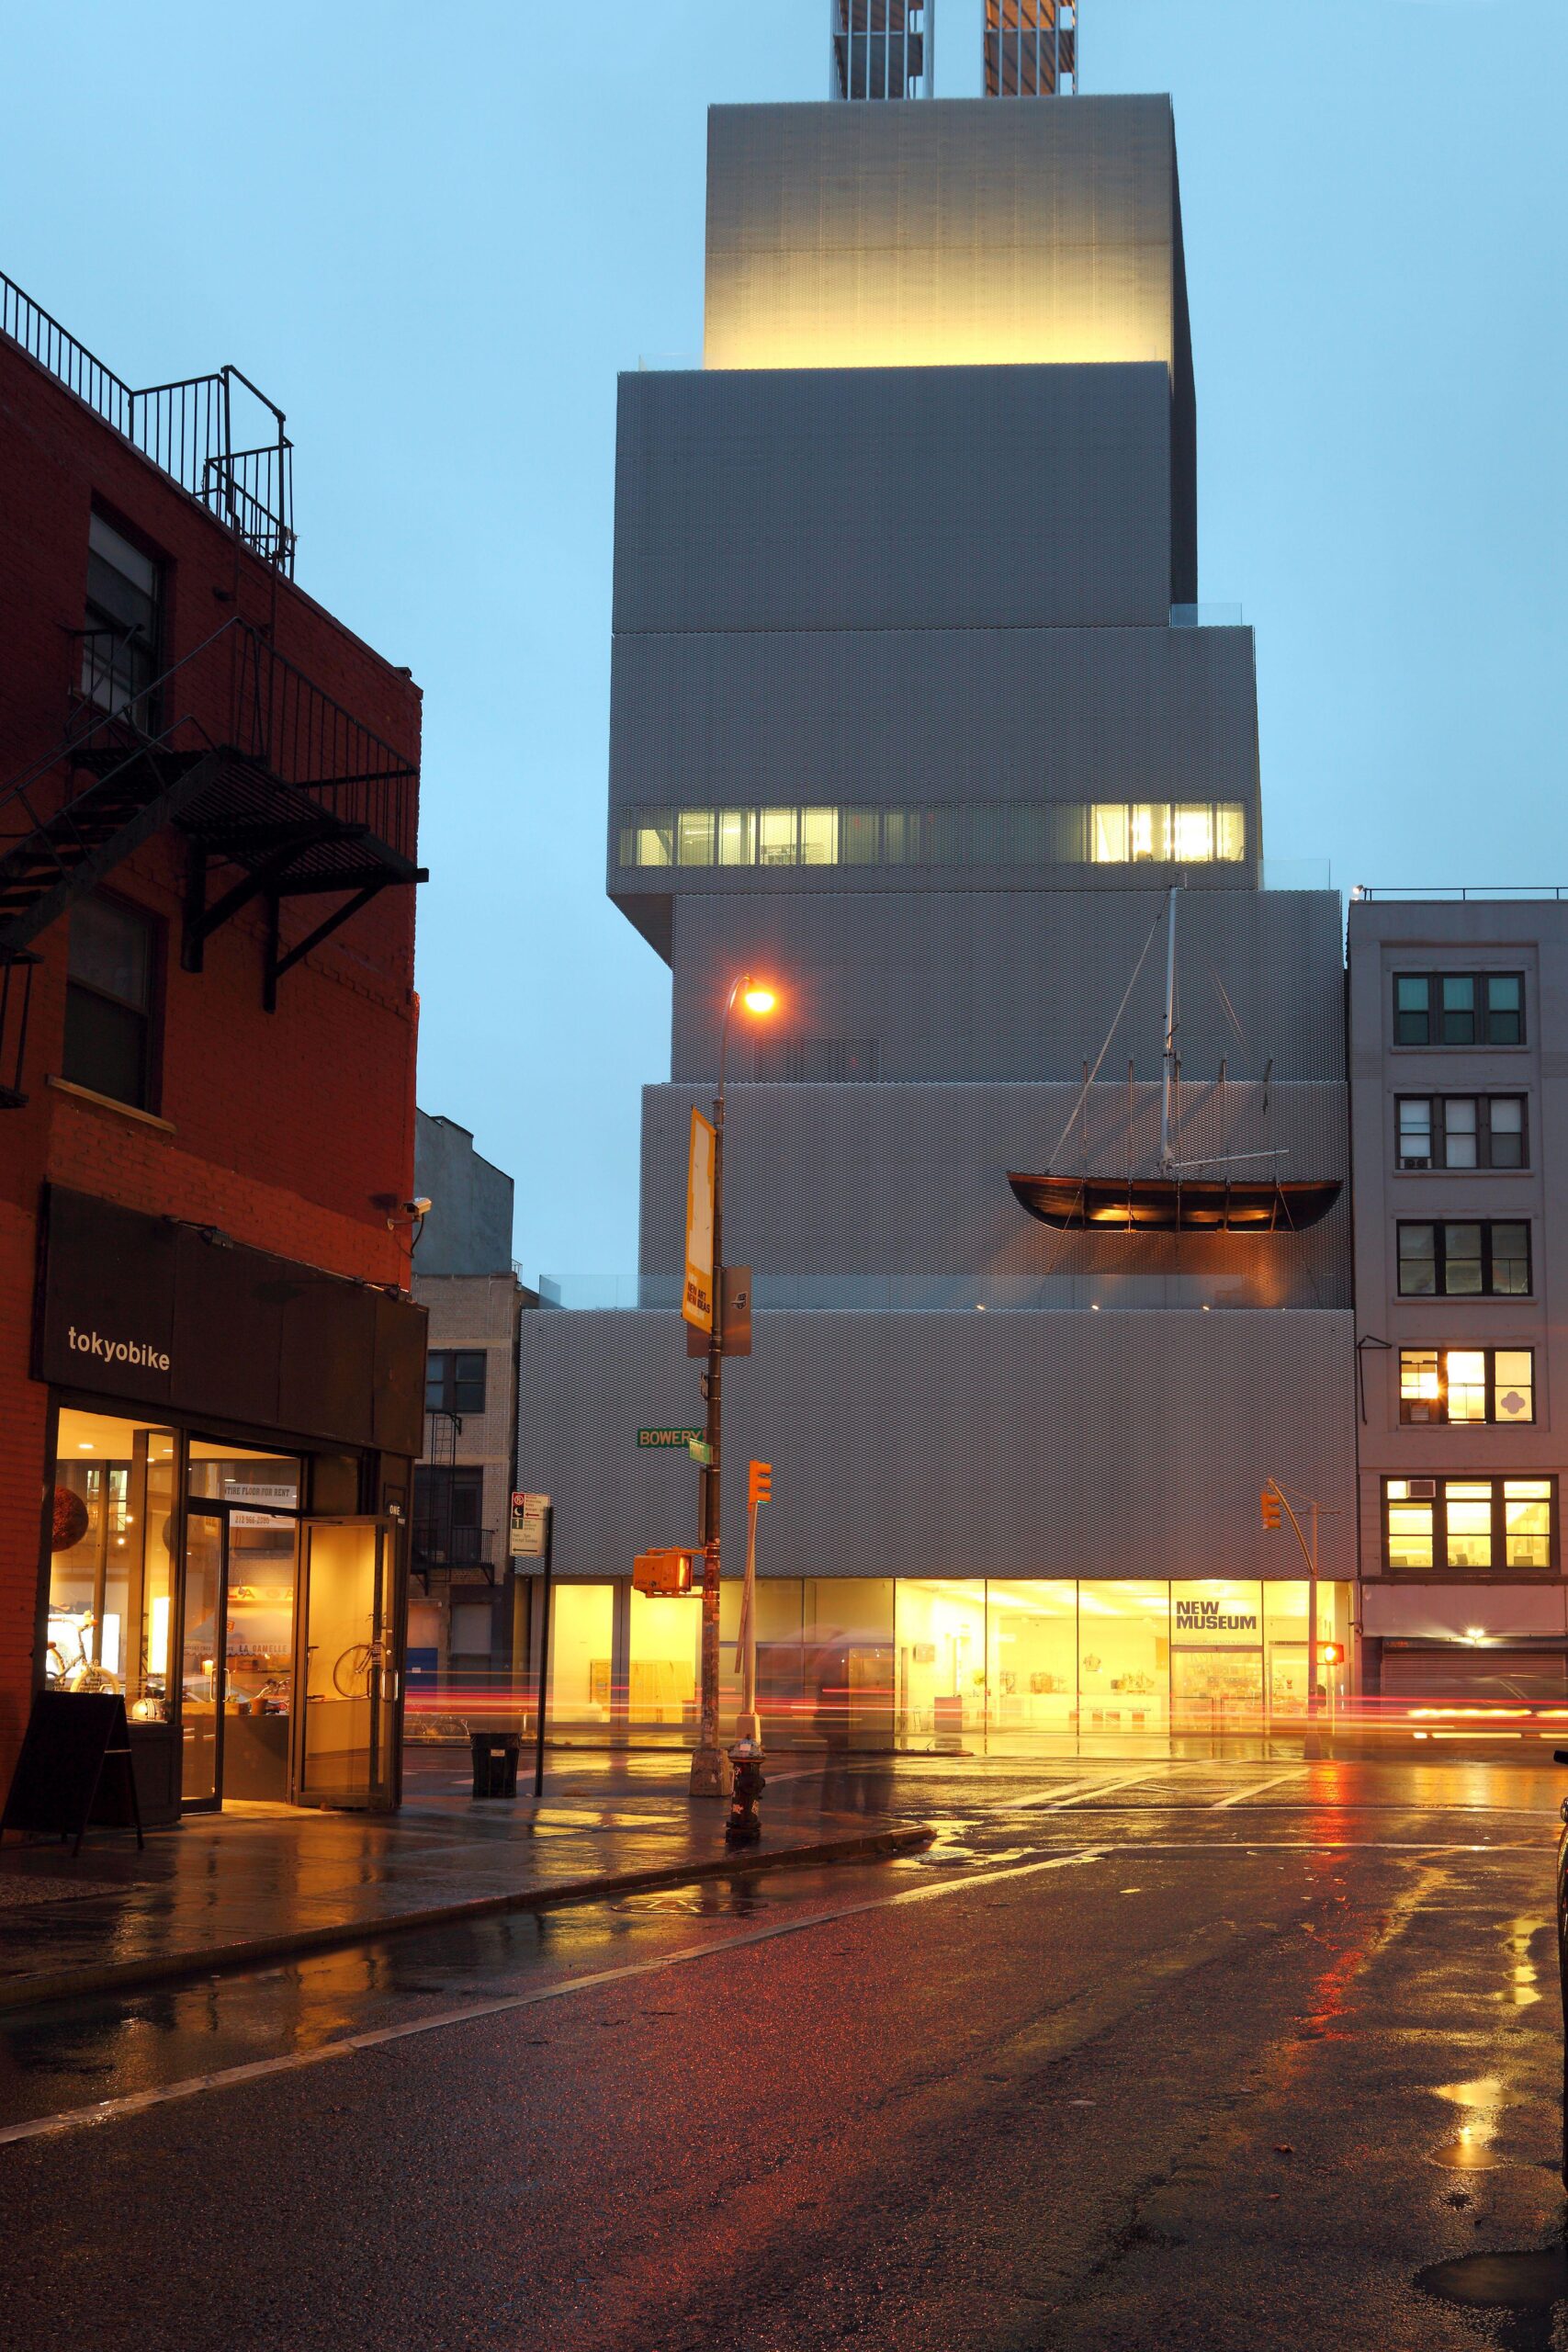 The New Museum at dusk. INTERFOTO / Alamy Stock Photo